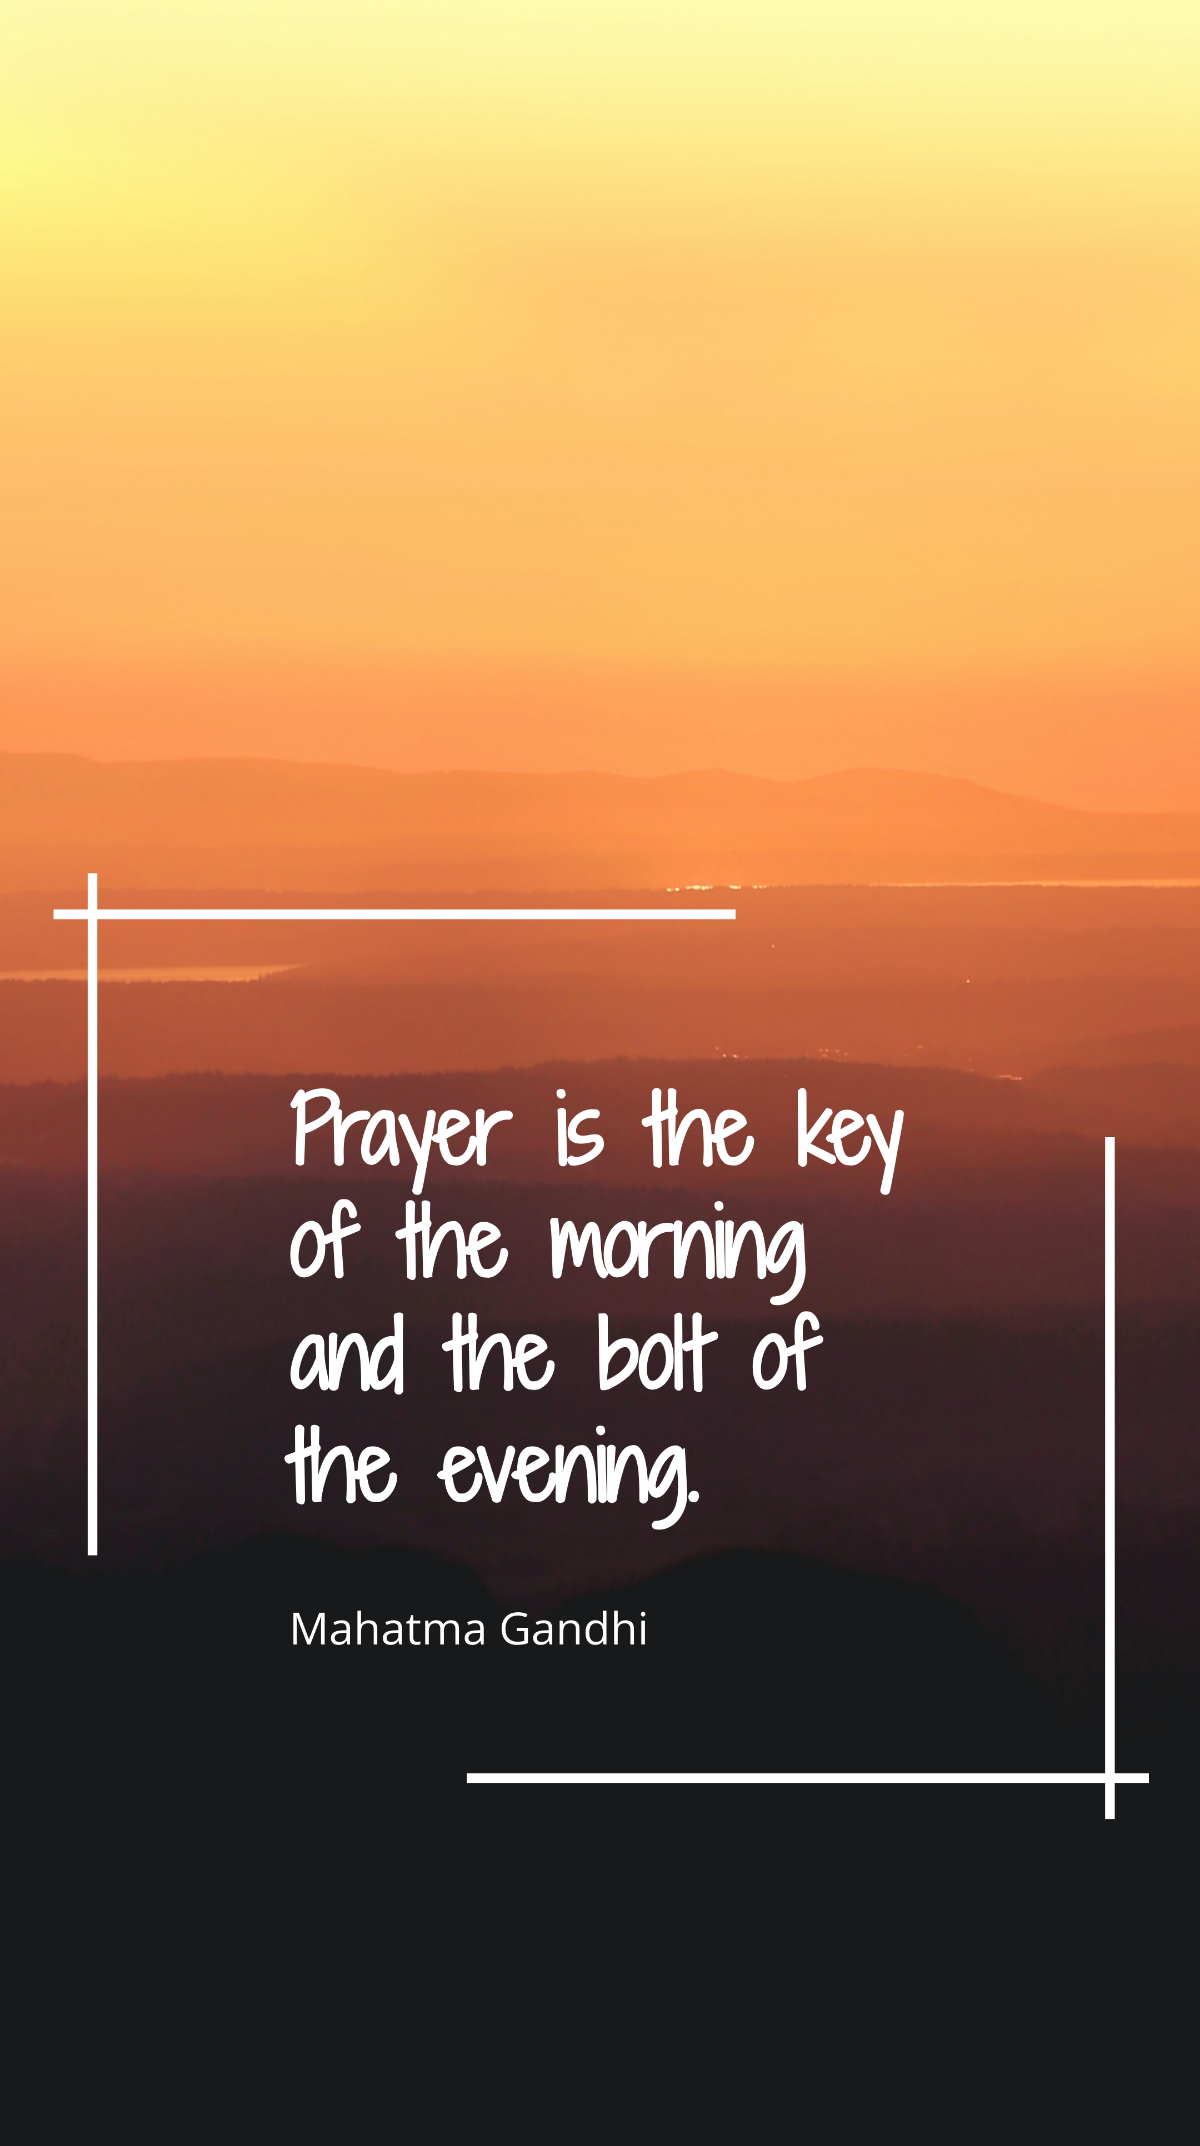 Mahatma Gandhi - Prayer is the key of the morning and the bolt of the evening. Template